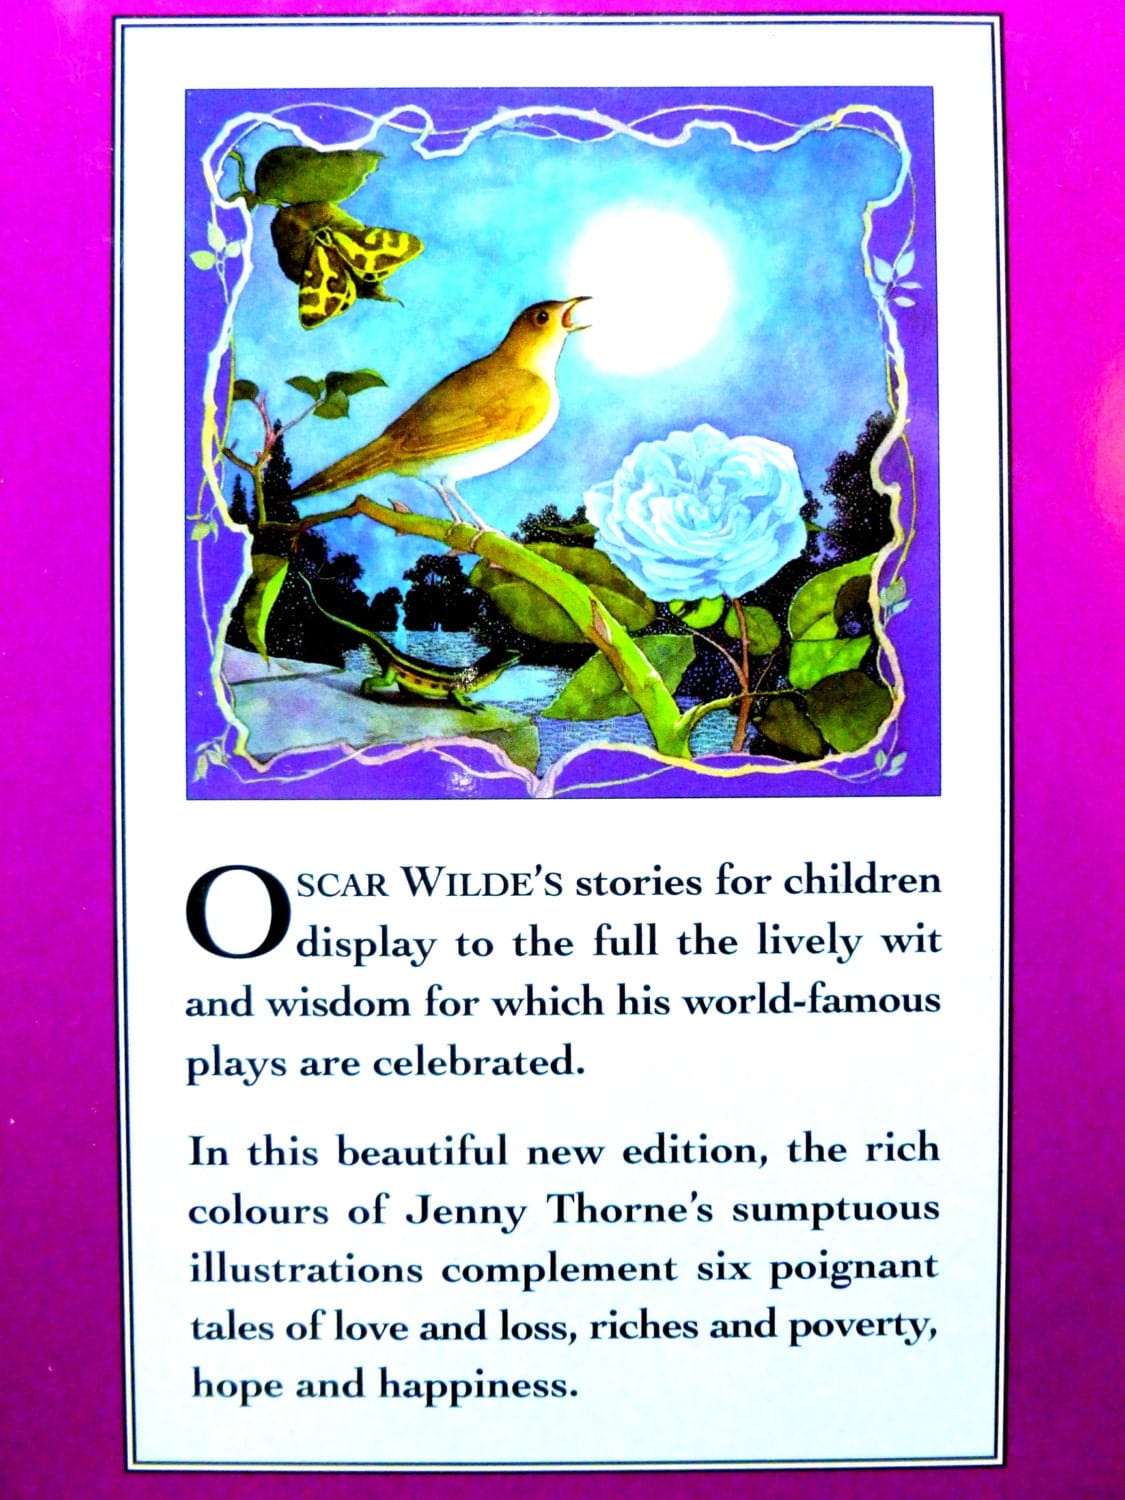 Back cover of Oscar Wilde Fairy Stories for Children inc the Happy Prince Vintage Fairy tale Book showing a nightingale singing against a blue and purple background and text: Oscar Wilde's stories for children display to full the lively wit...